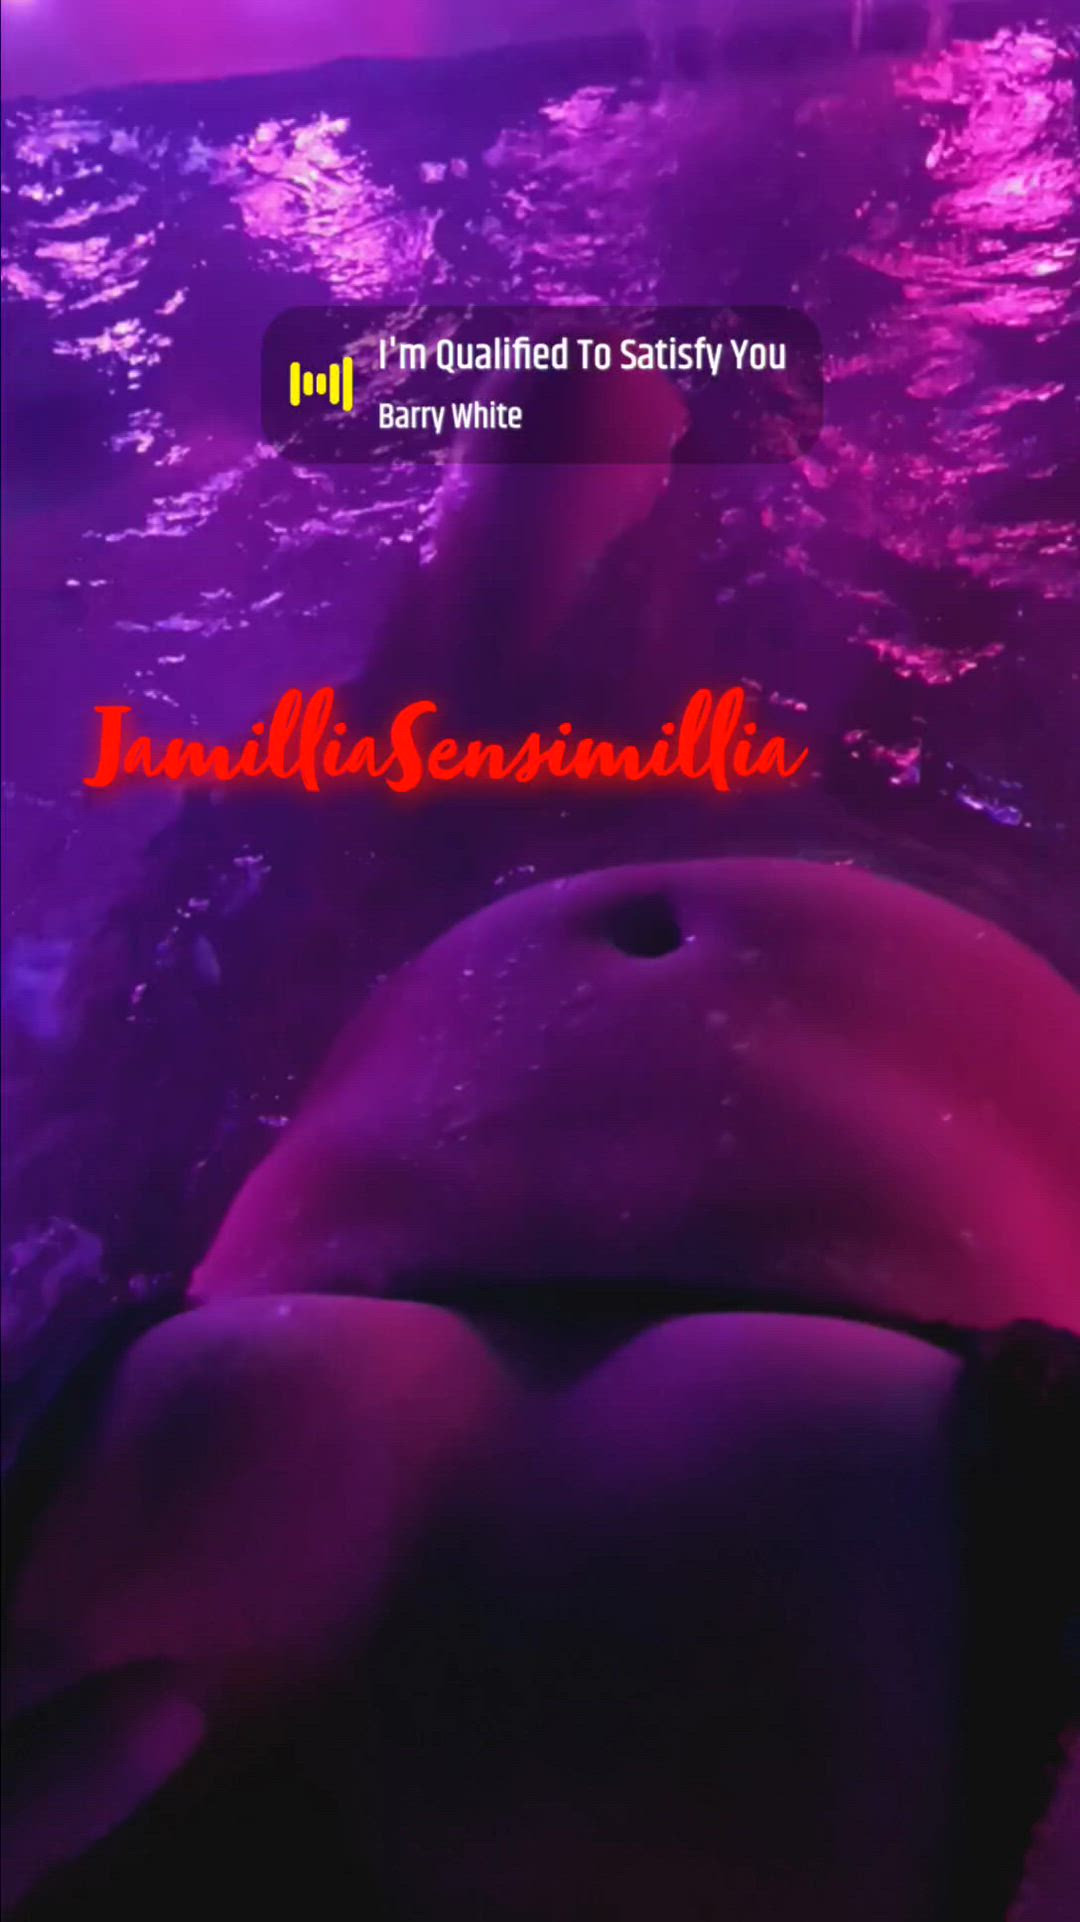 Tits porn video with onlyfans model jamilliasensimillia <strong>@u335416731</strong>